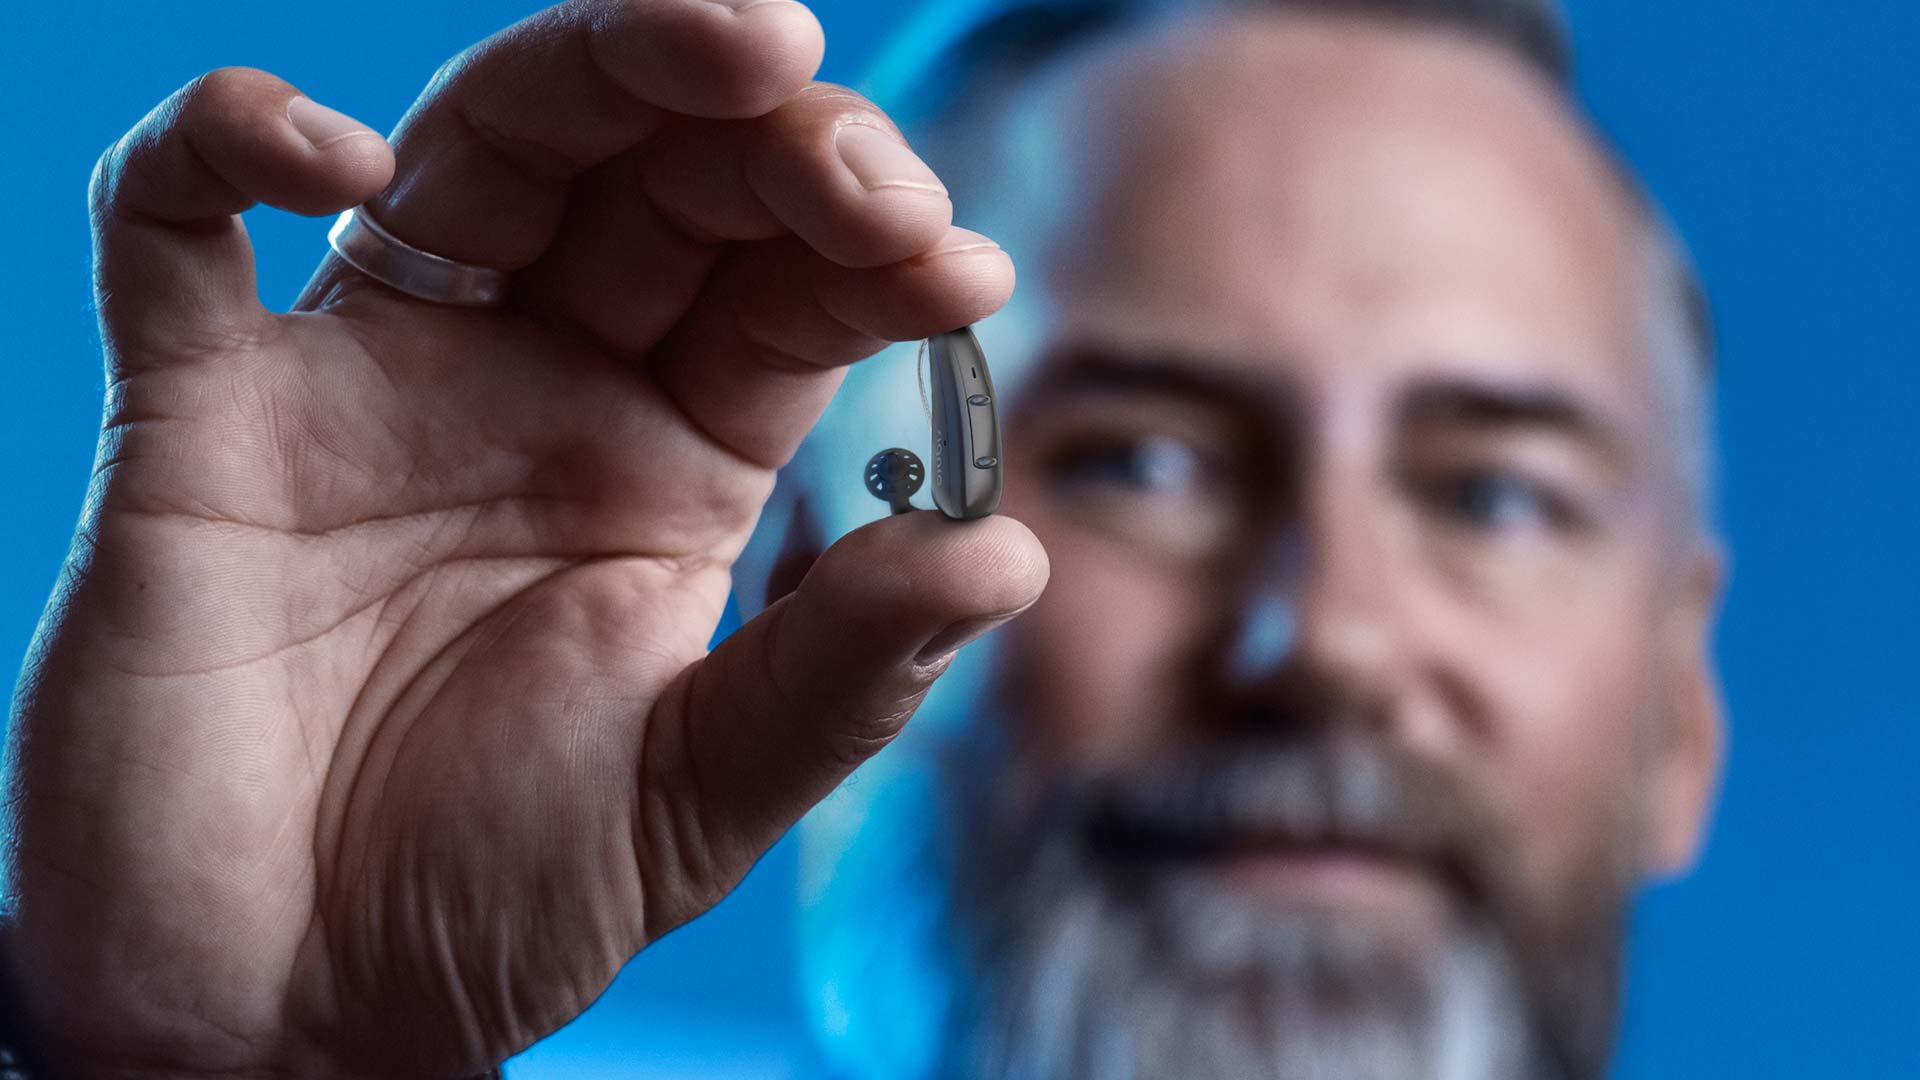 Man with beard holding Signia Pure Charge&Go hearing aid